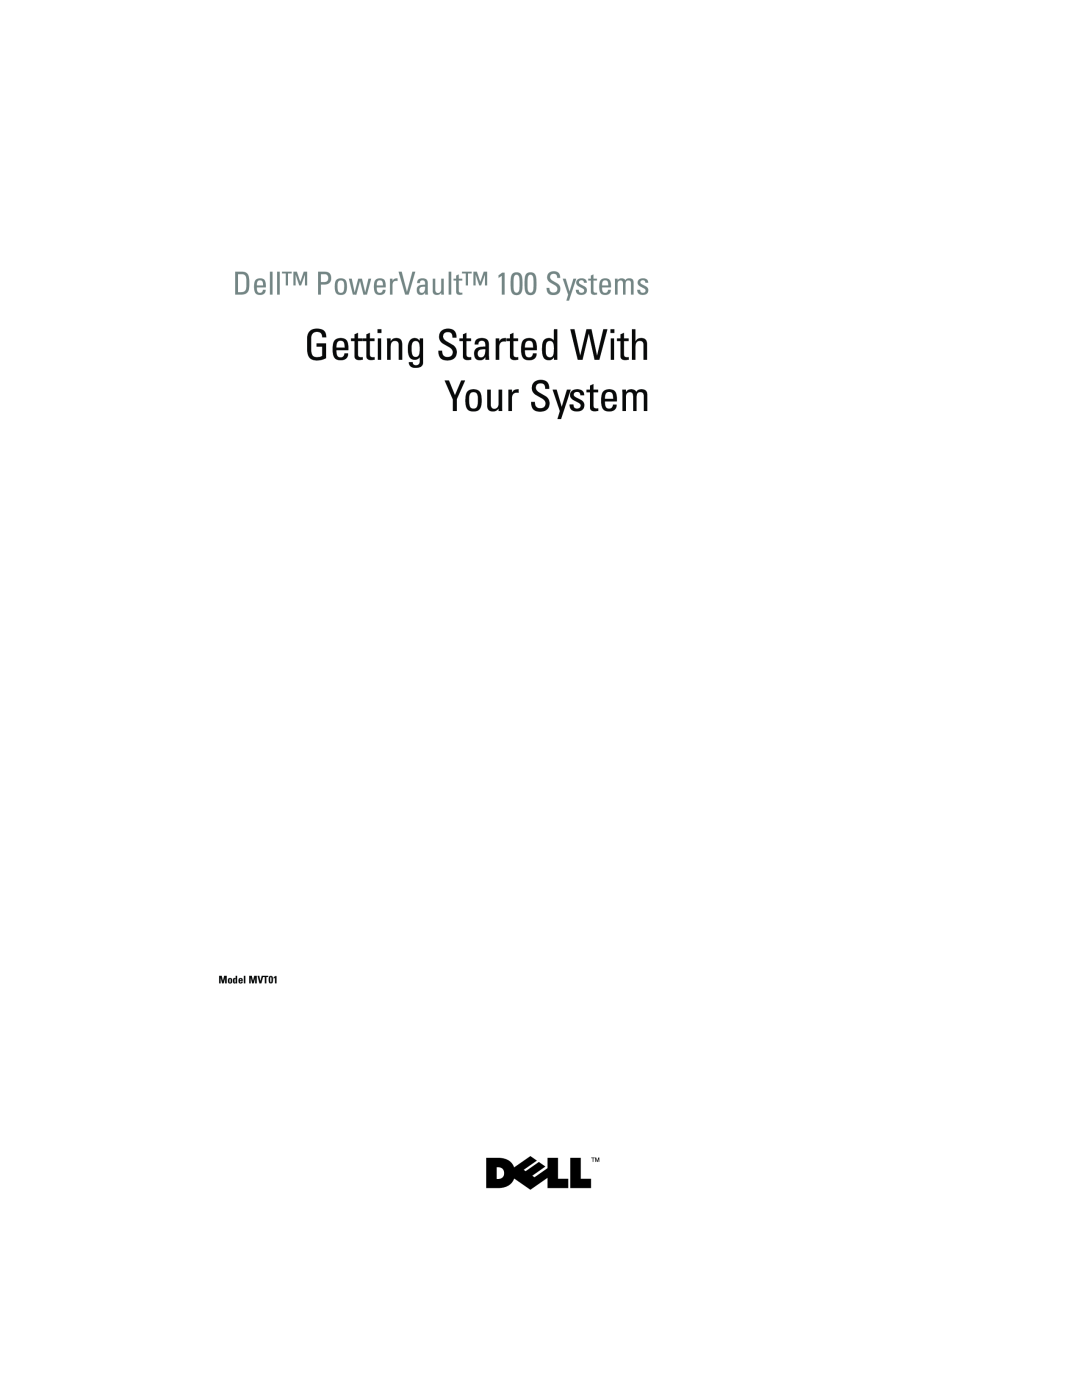 Dell JU892 manual Dell PowerVault 100 Systems, Getting Started With Your System, Model MVT01 